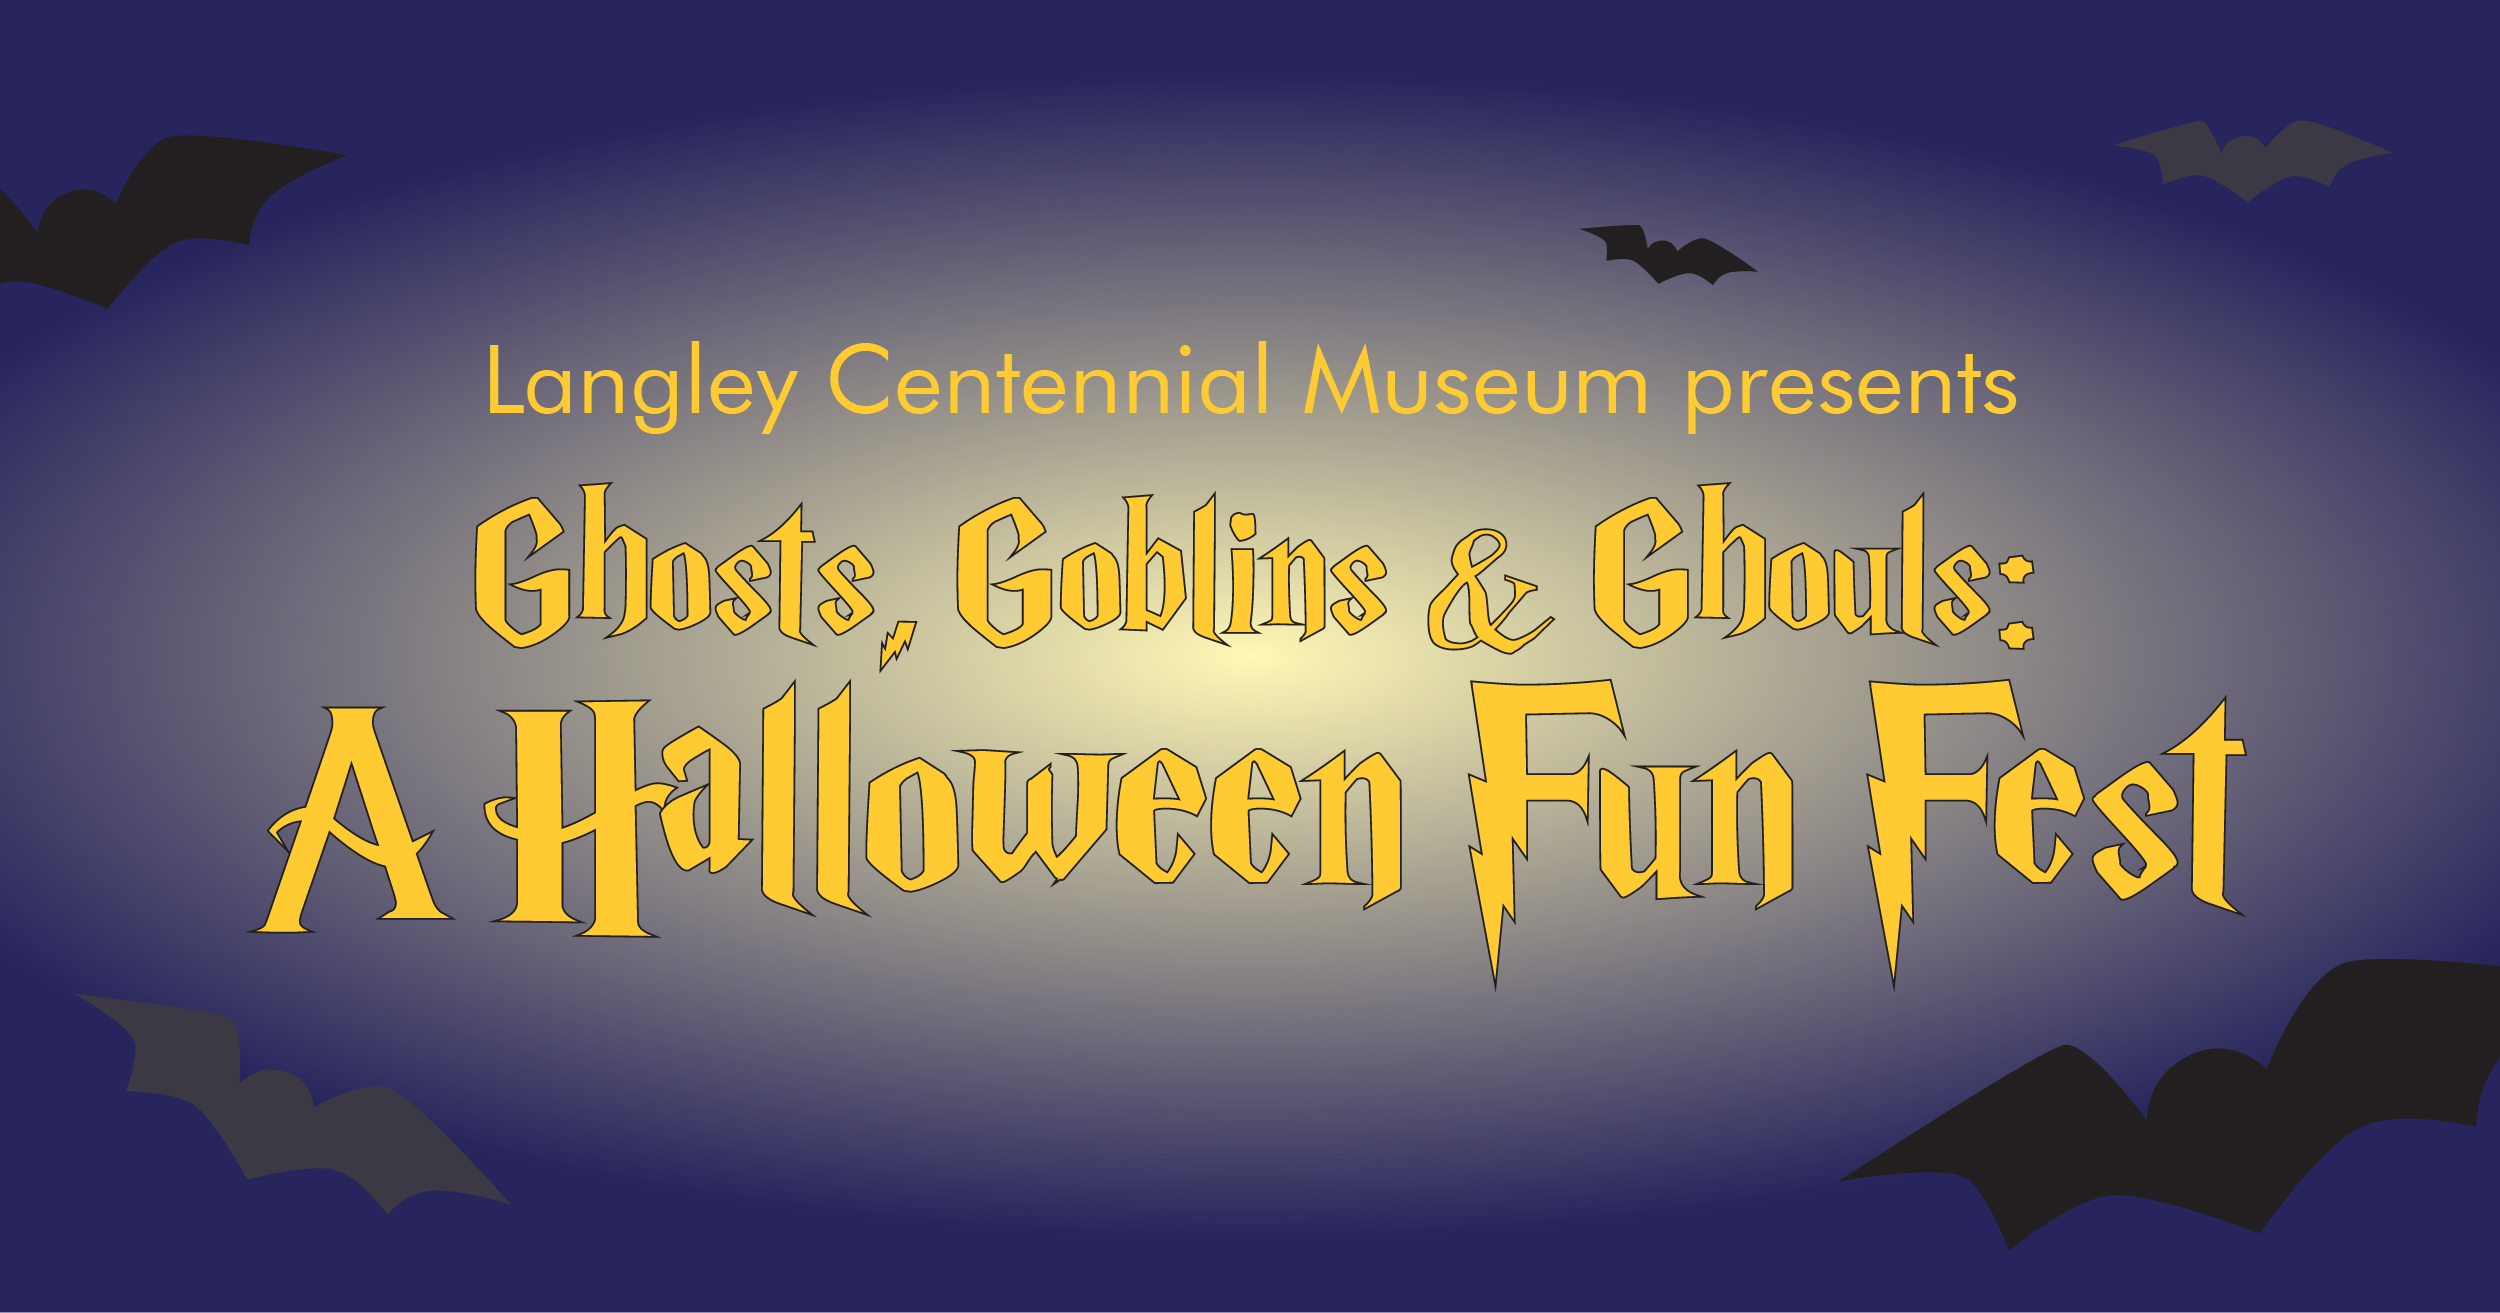 Ghosts, Goblins, and Ghouls: A Halloween Fun Fest